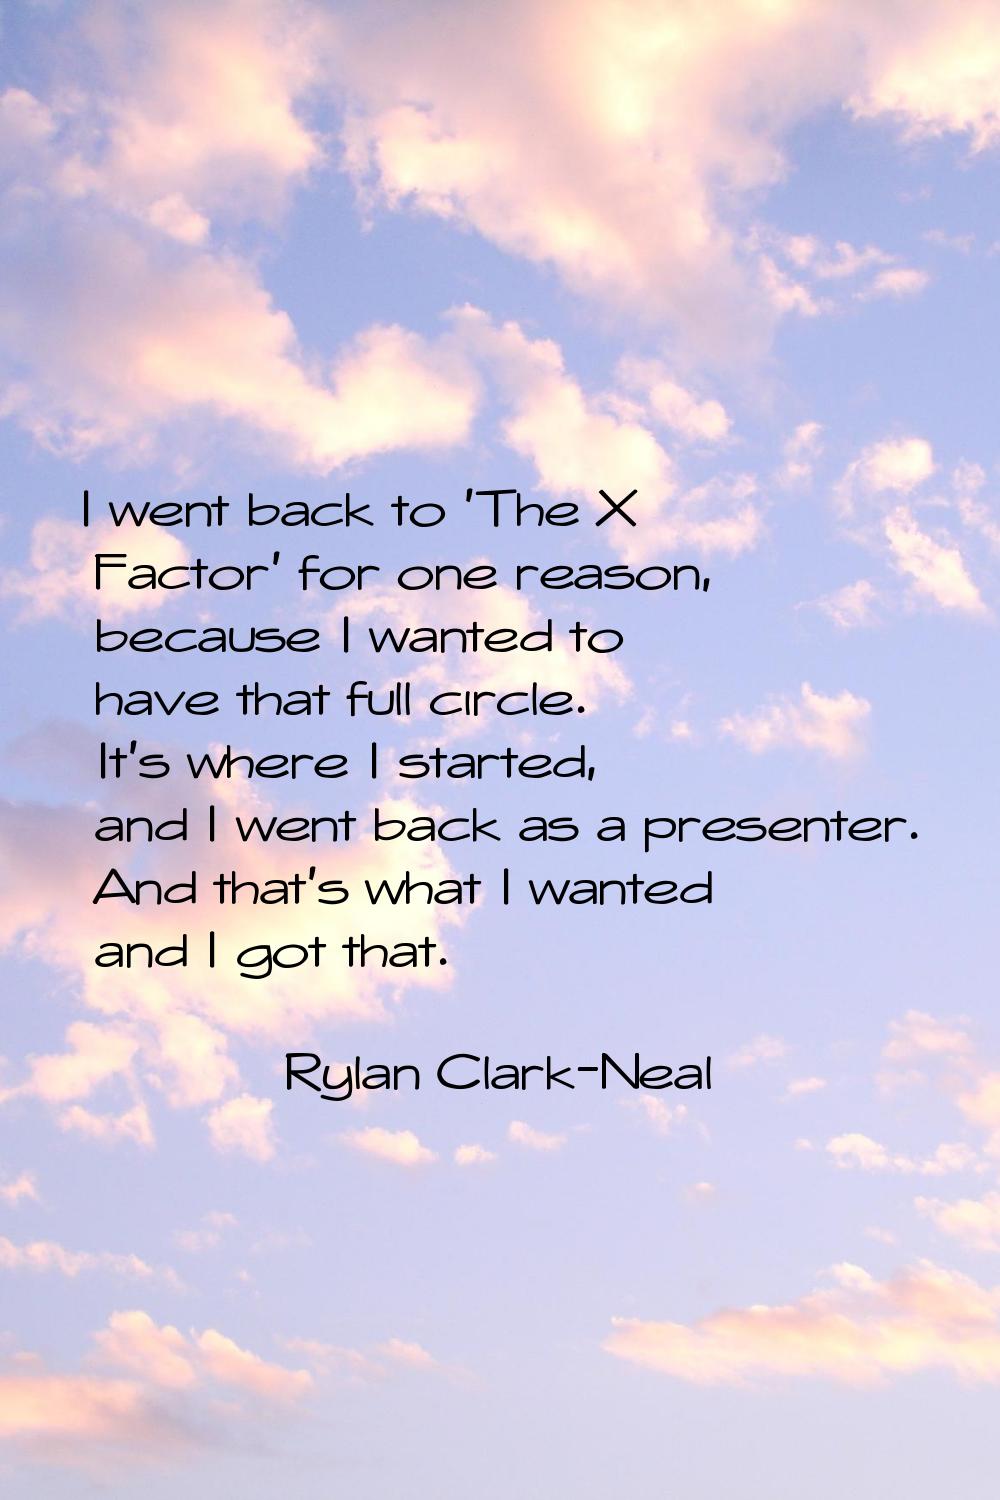 I went back to 'The X Factor' for one reason, because I wanted to have that full circle. It's where